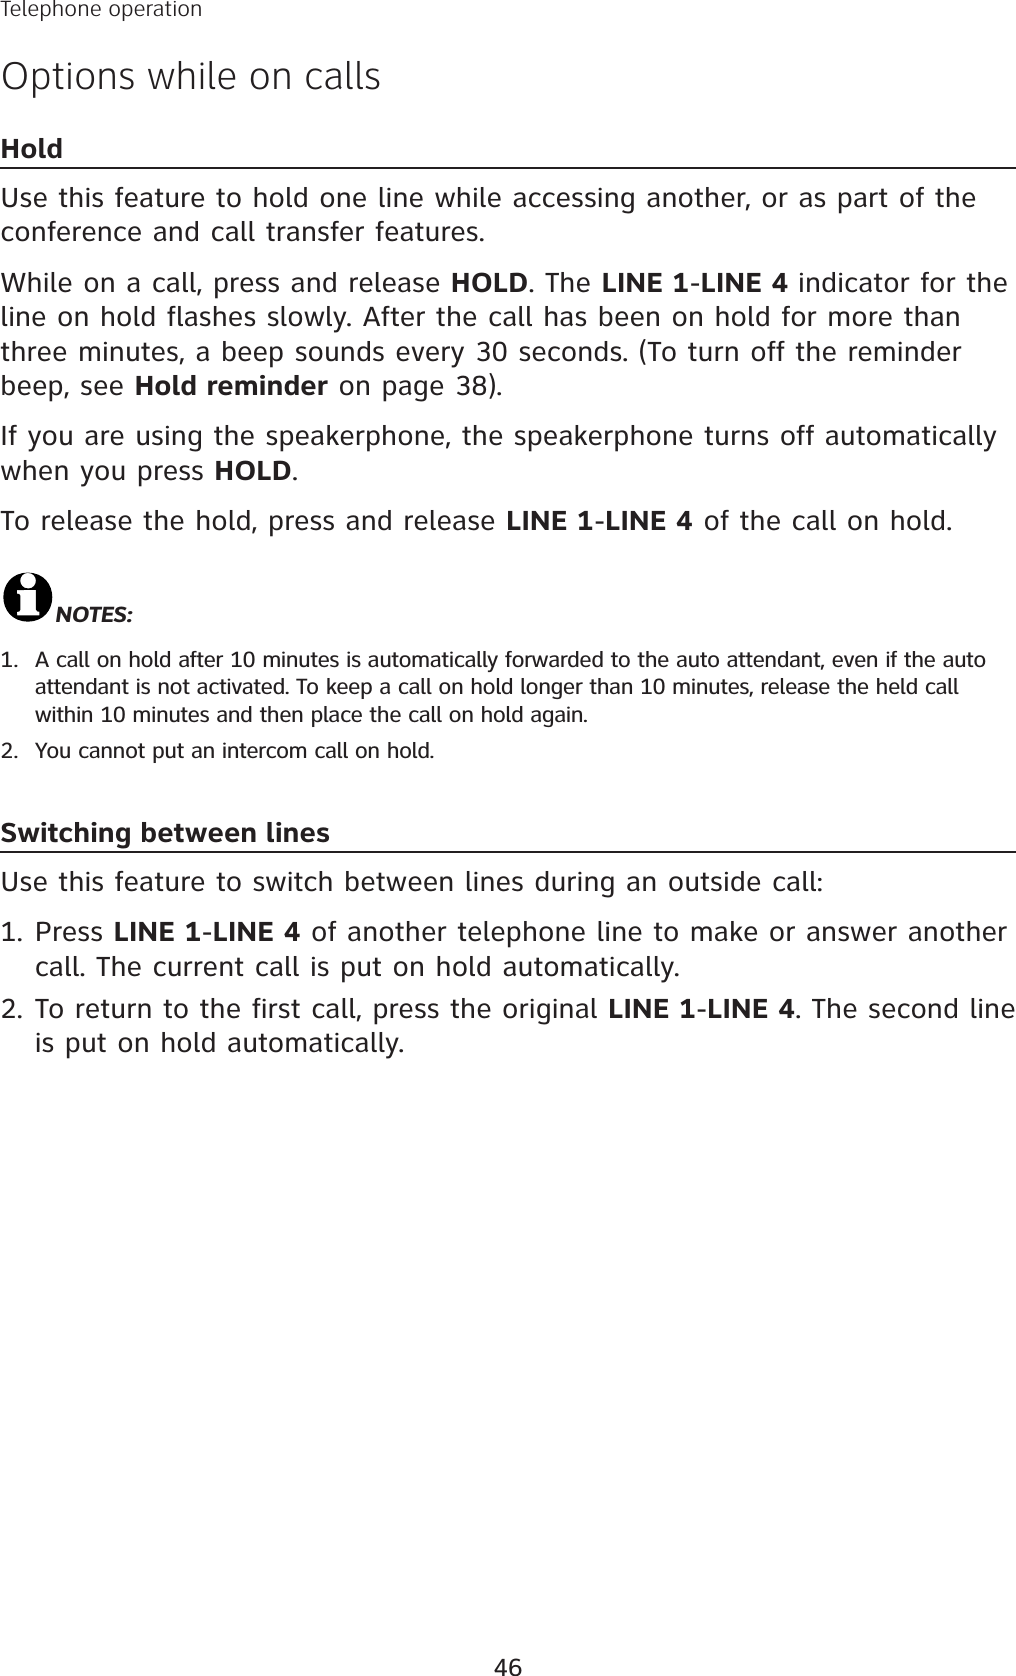 46Telephone operationOptions while on callsHoldUse this feature to hold one line while accessing another, or as part of the conference and call transfer features. While on a call, press and release HOLD. The LINE 1-LINE 4 indicator for the line on hold flashes slowly. After the call has been on hold for more than three minutes, a beep sounds every 30 seconds. (To turn off the reminder beep, see Hold reminder on page 38).If you are using the speakerphone, the speakerphone turns off automatically when you press HOLD.To release the hold, press and release LINE 1-LINE 4 of the call on hold.NOTES:A call on hold after 10 minutes is automatically forwarded to the auto attendant, even if the auto attendant is not activated. To keep a call on hold longer than 10 minutes, release the held call  within 10 minutes and then place the call on hold again.You cannot put an intercom call on hold.Switching between linesUse this feature to switch between lines during an outside call:Press LINE 1-LINE 4 of another telephone line to make or answer another call. The current call is put on hold automatically.To return to the first call, press the original LINE 1-LINE 4. The second line is put on hold automatically. 1.2.1.2.